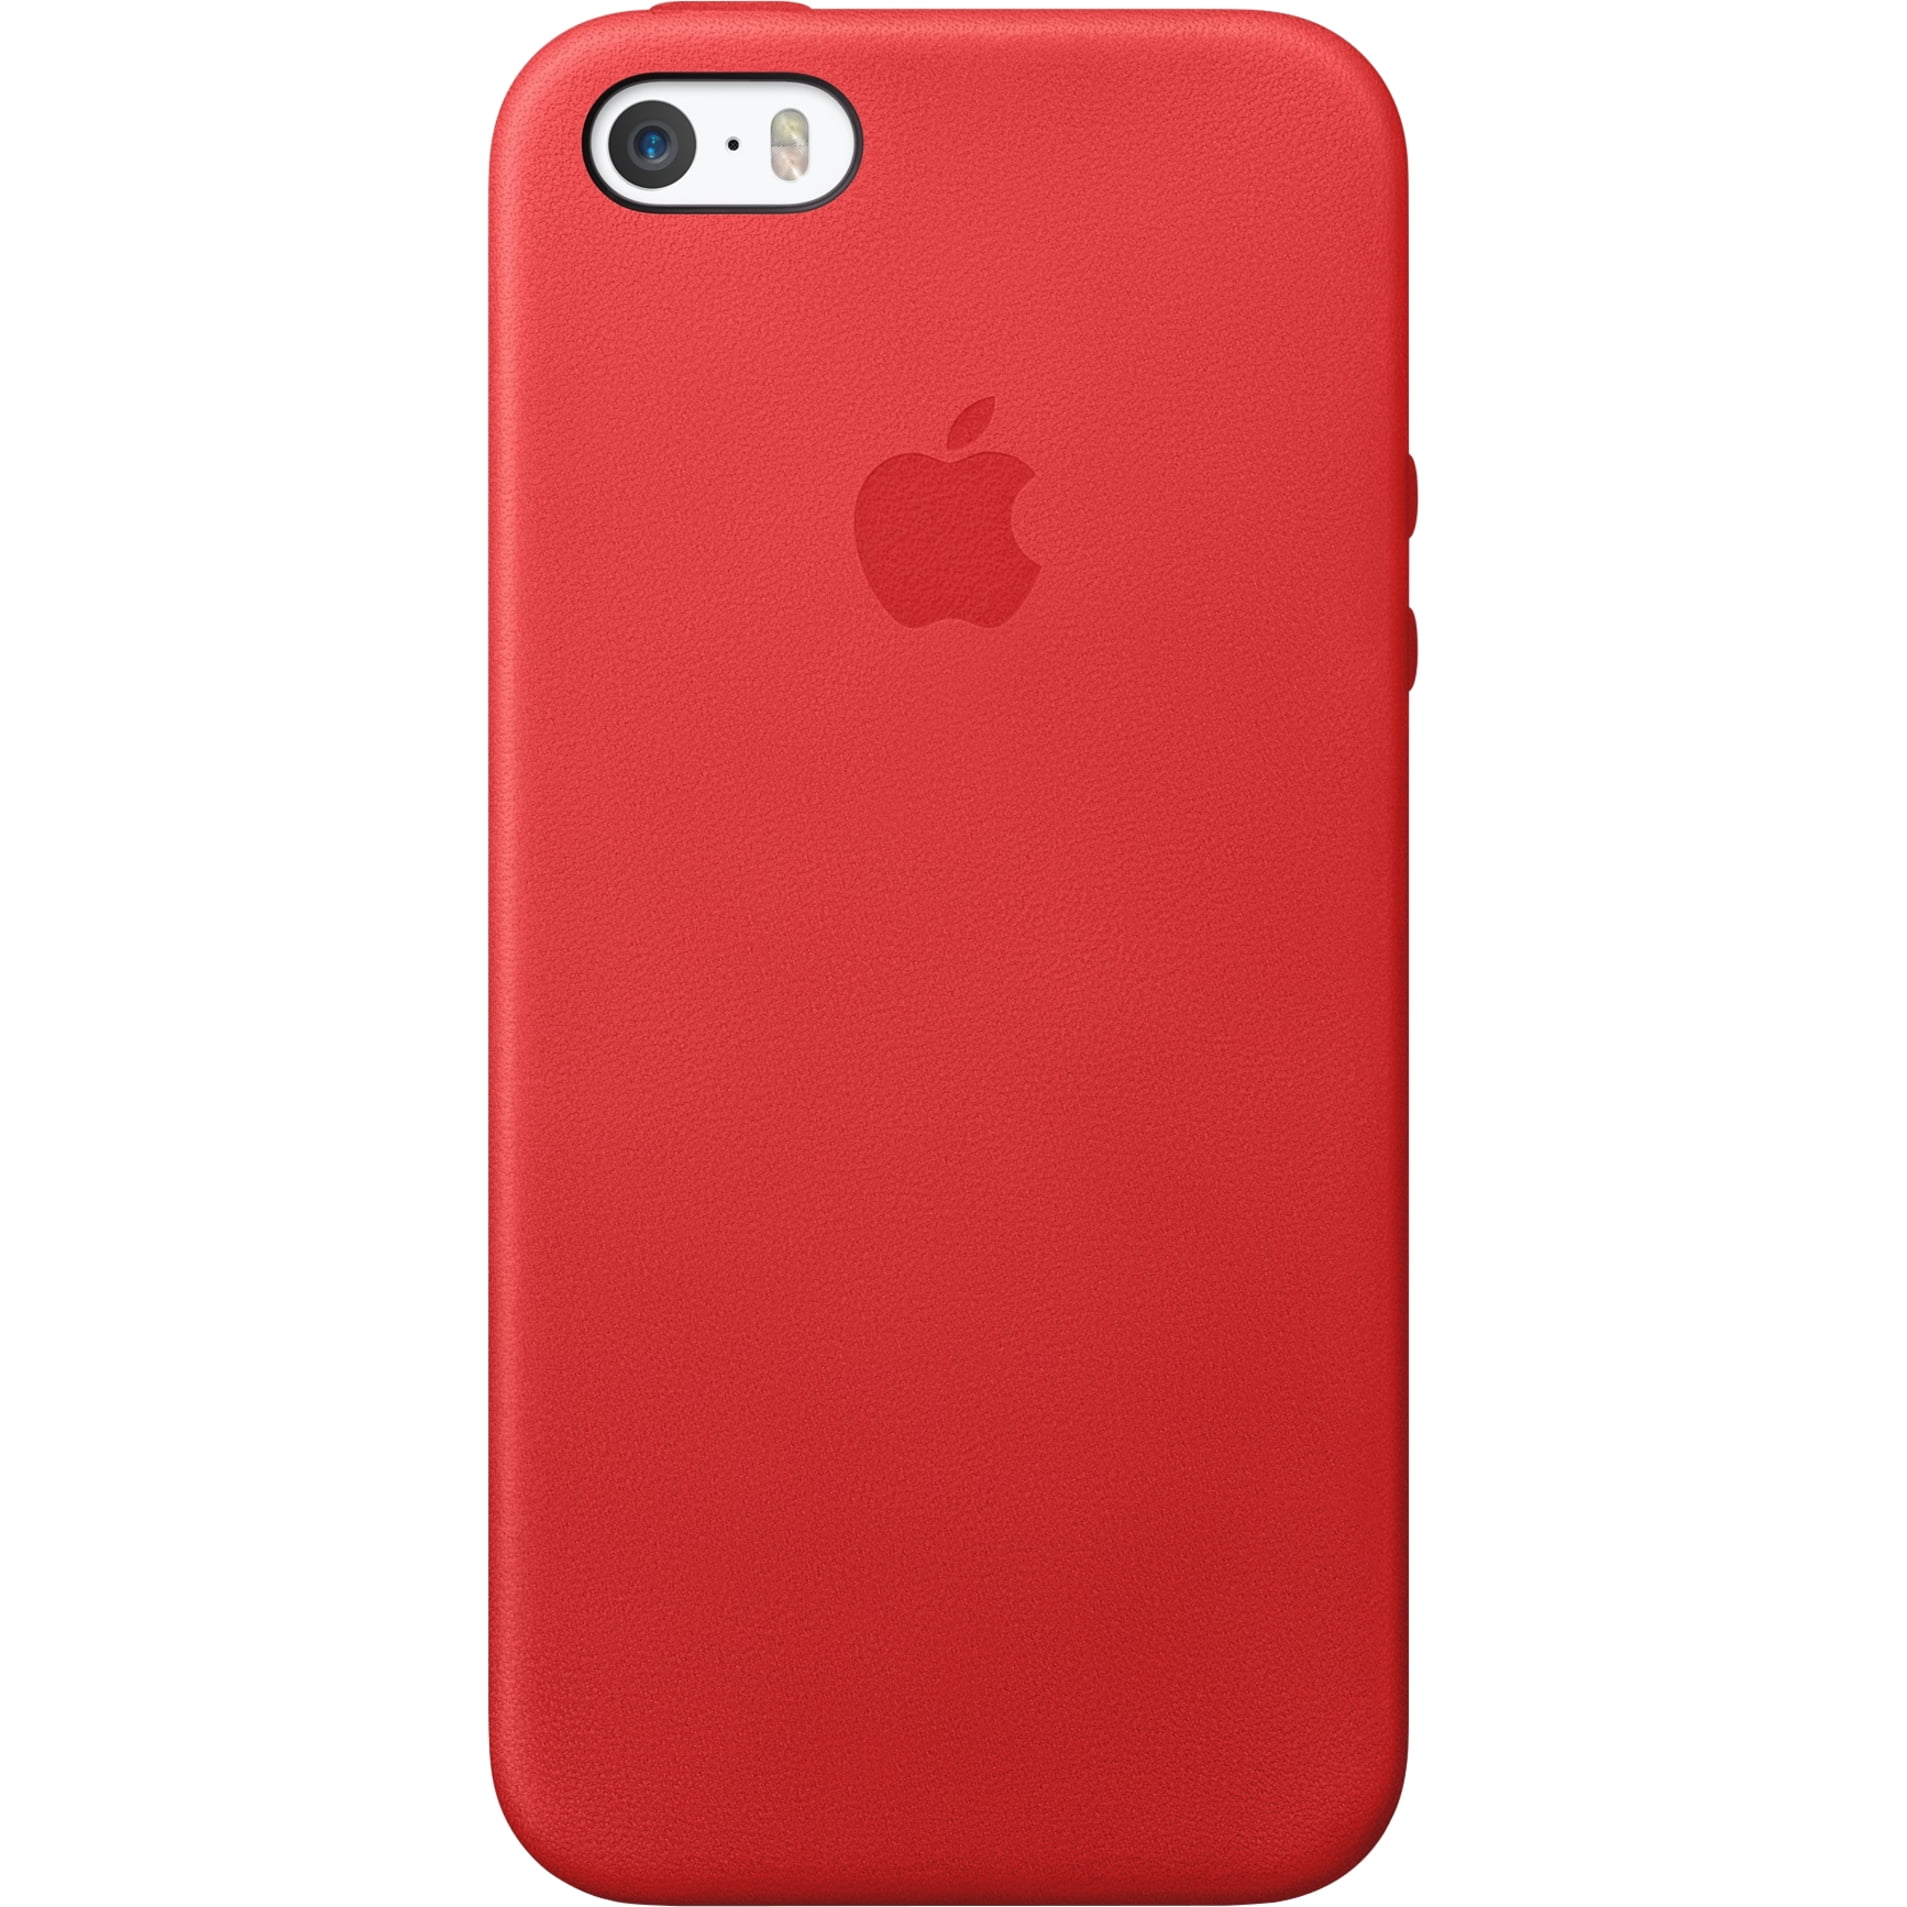 Apple Red for iPhone MF046LL/A - Walmart.com